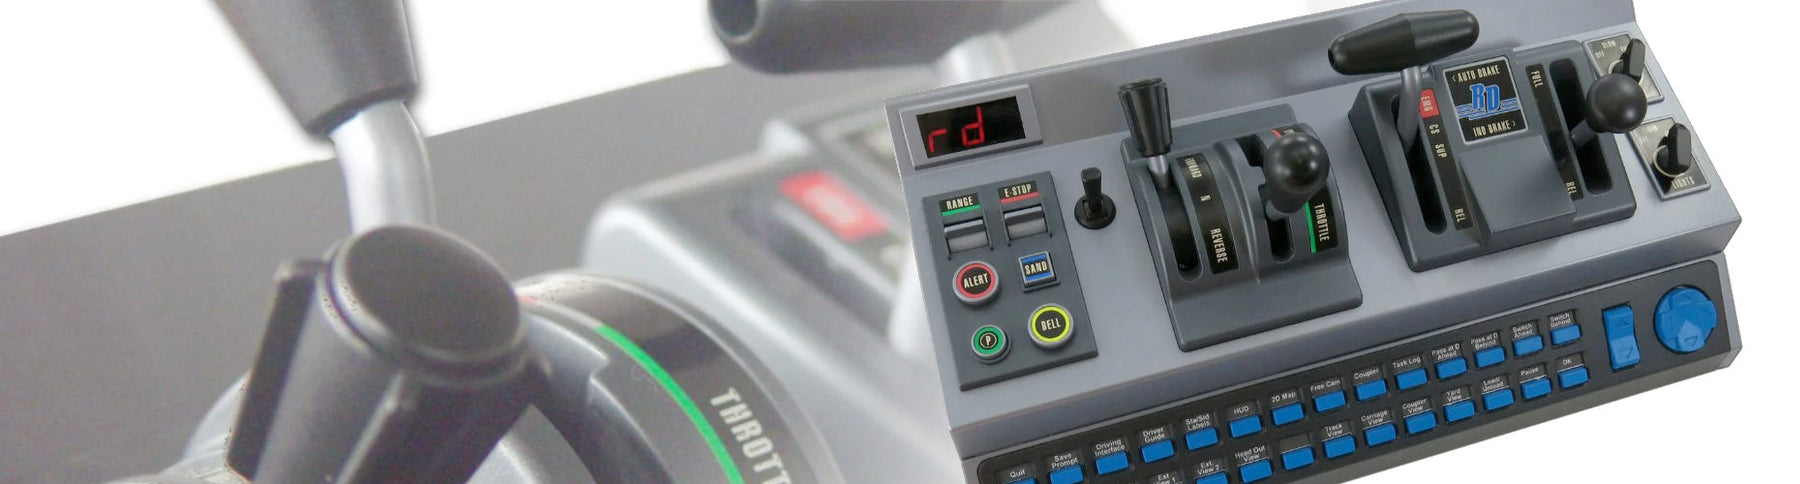 Why the RailDriver control unit makes the perfect gift for train enthusiasts everywhere